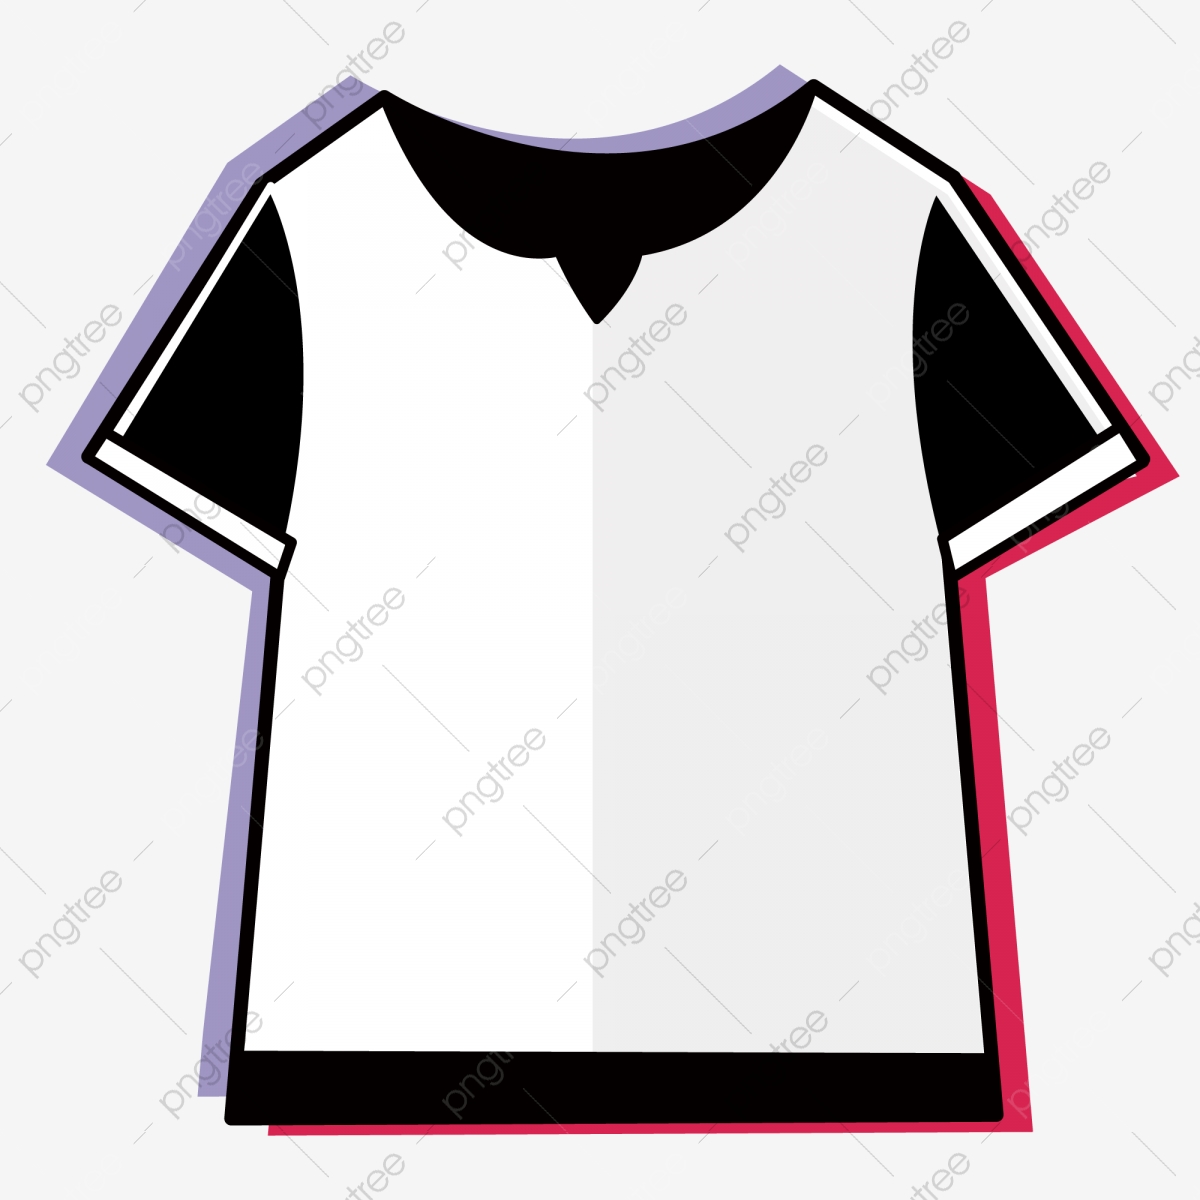 shirts clipart two